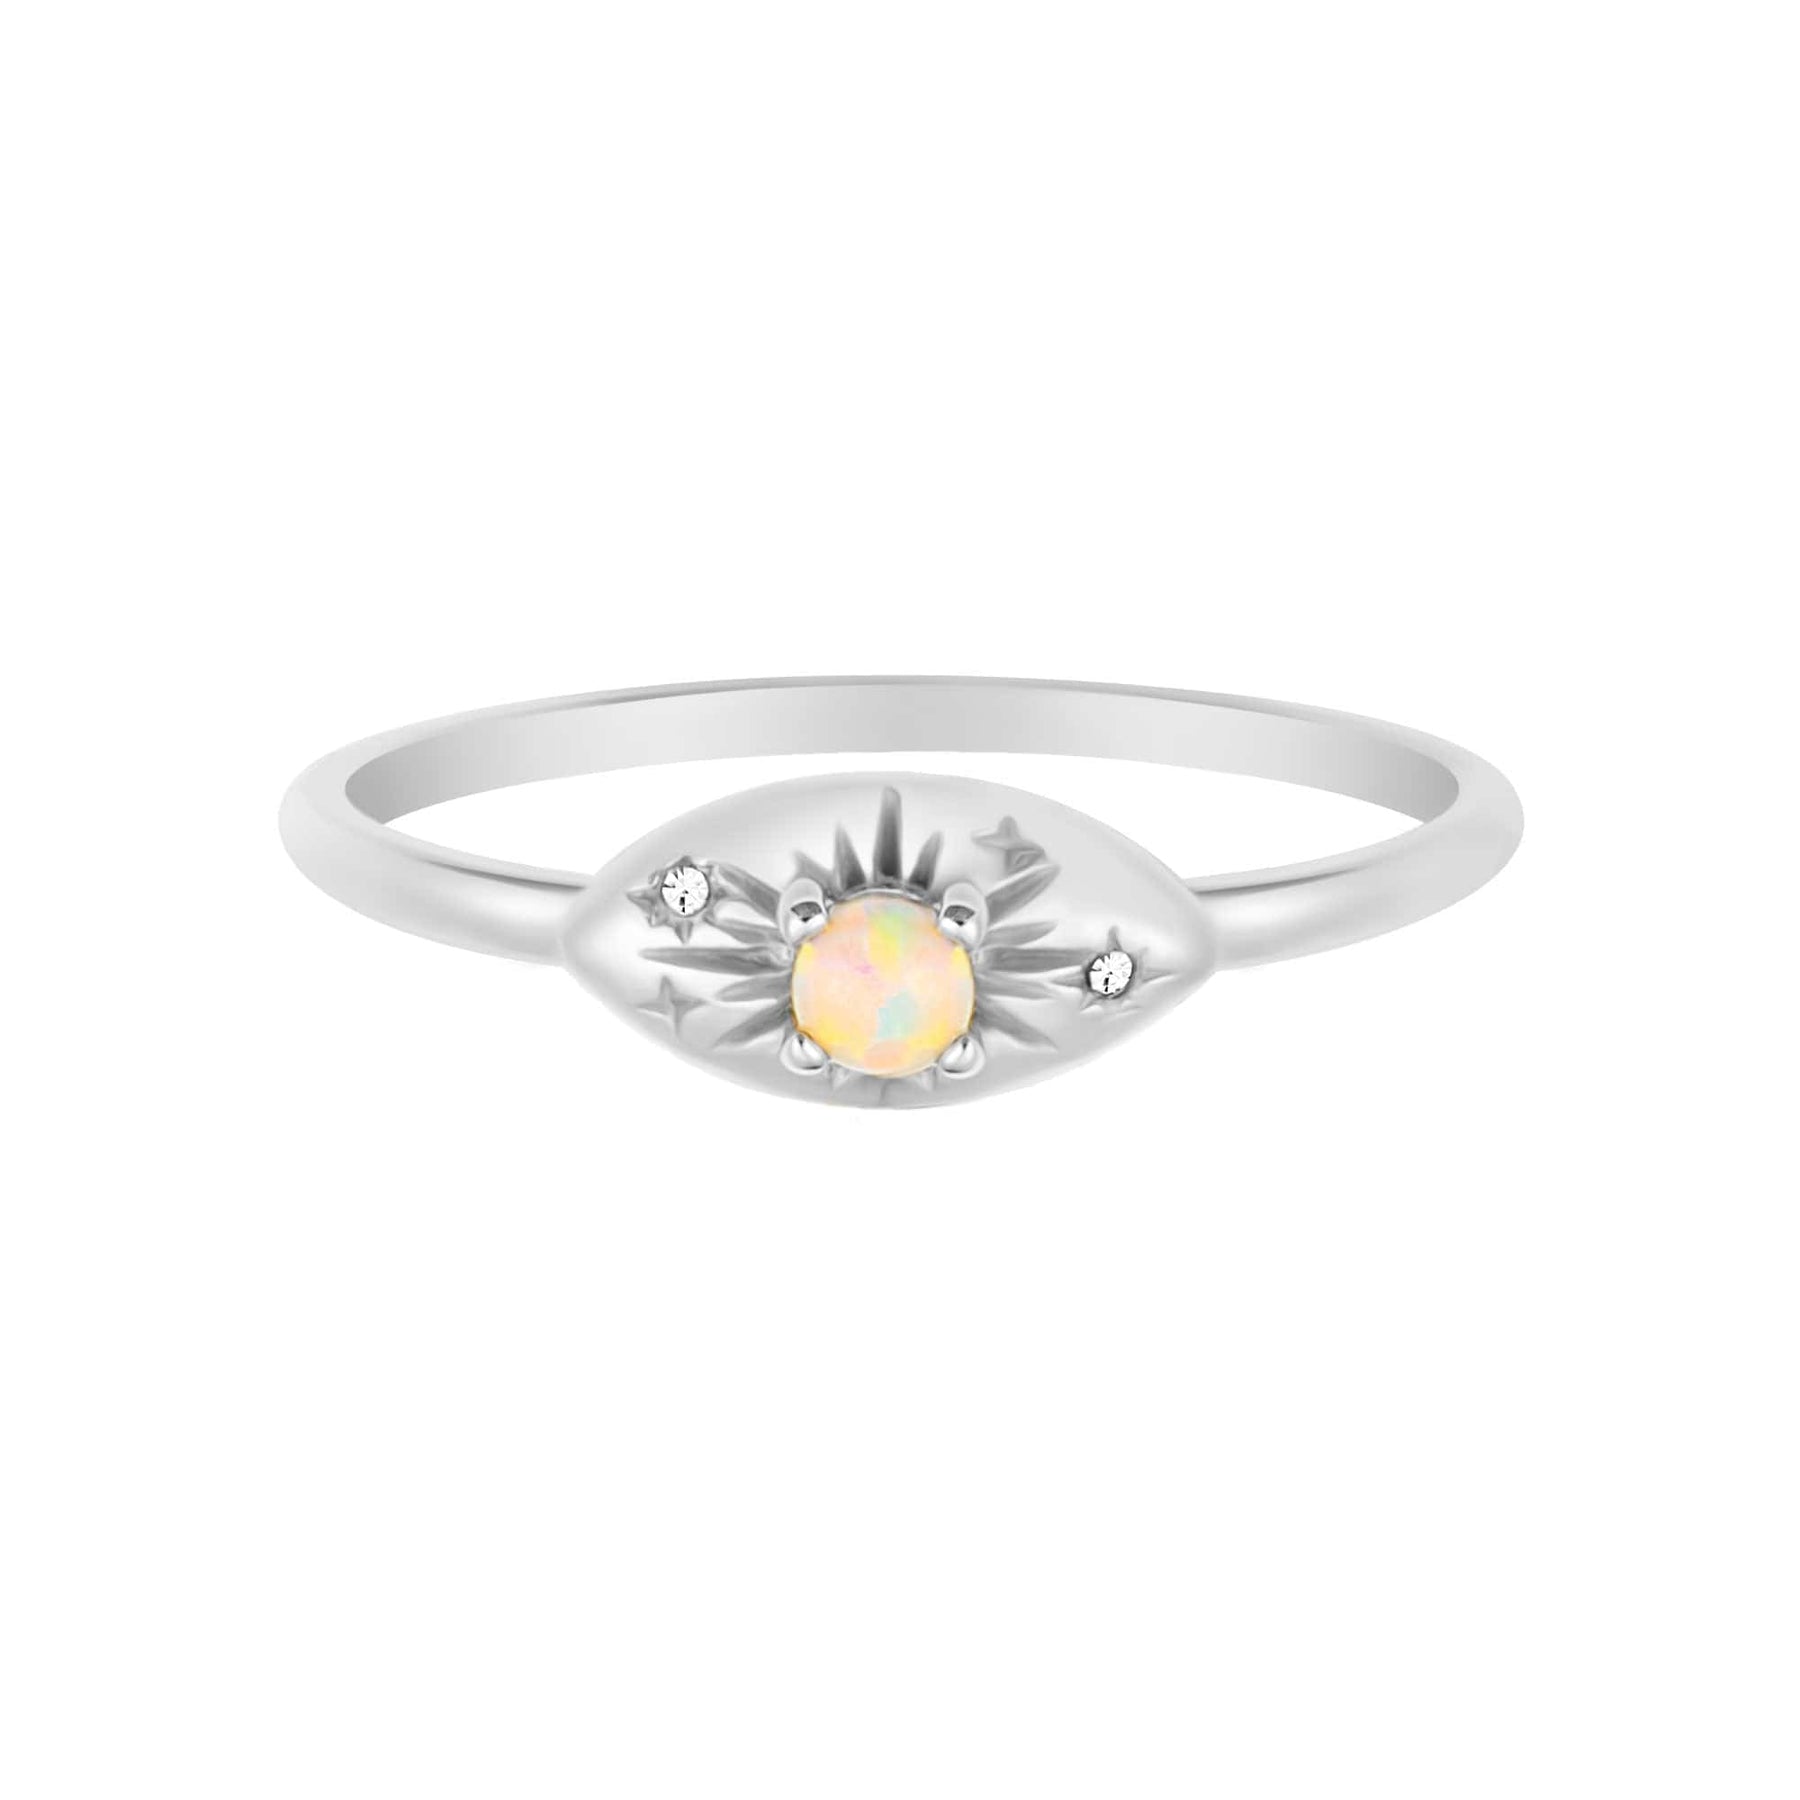 BohoMoon Stainless Steel Snow Opal Ring Silver / US 6 / UK L / EUR 51 (small)